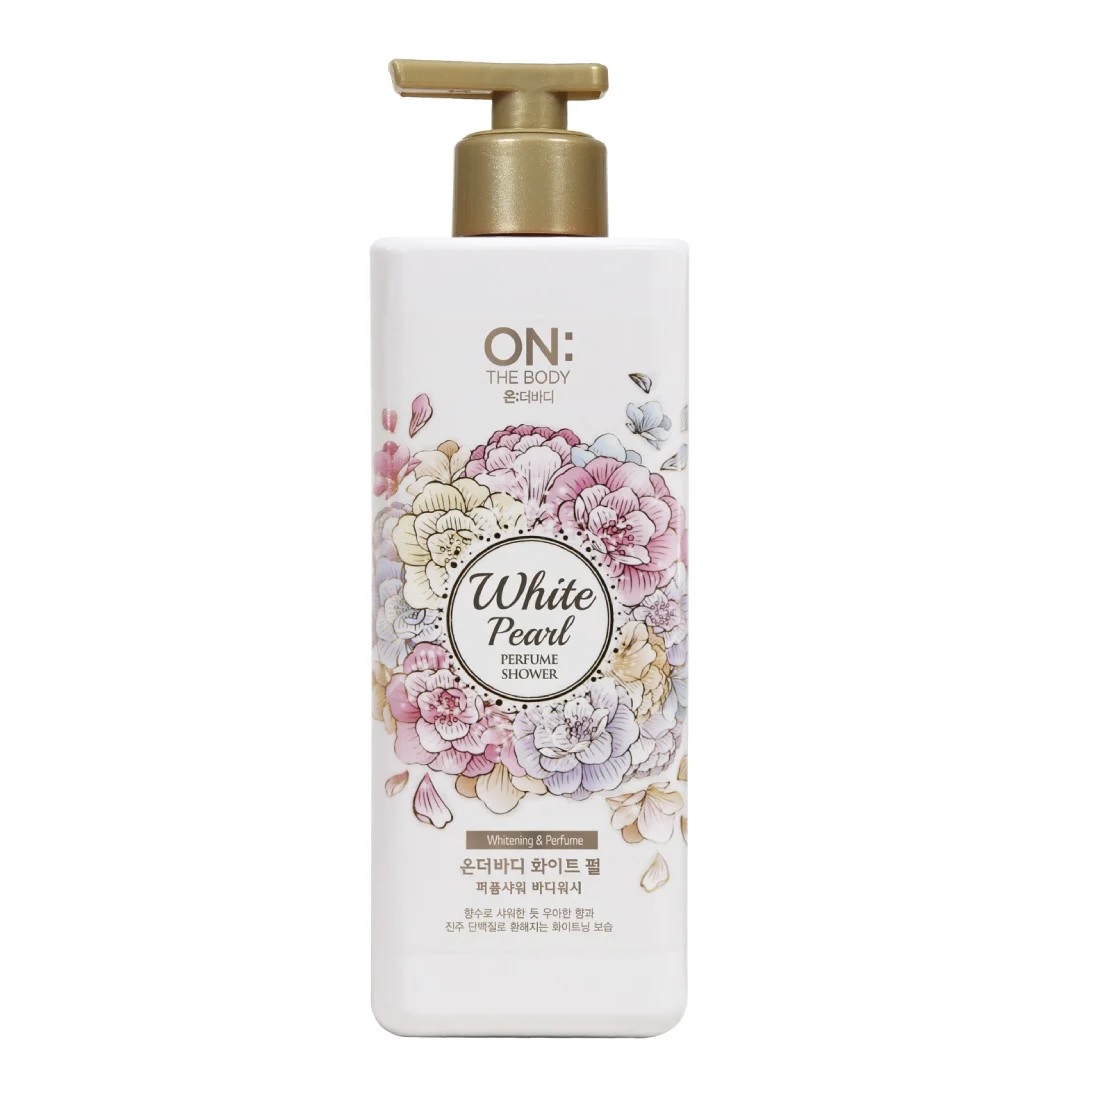 Sữa Tắm On: The Body White Pearl Perfume Shower